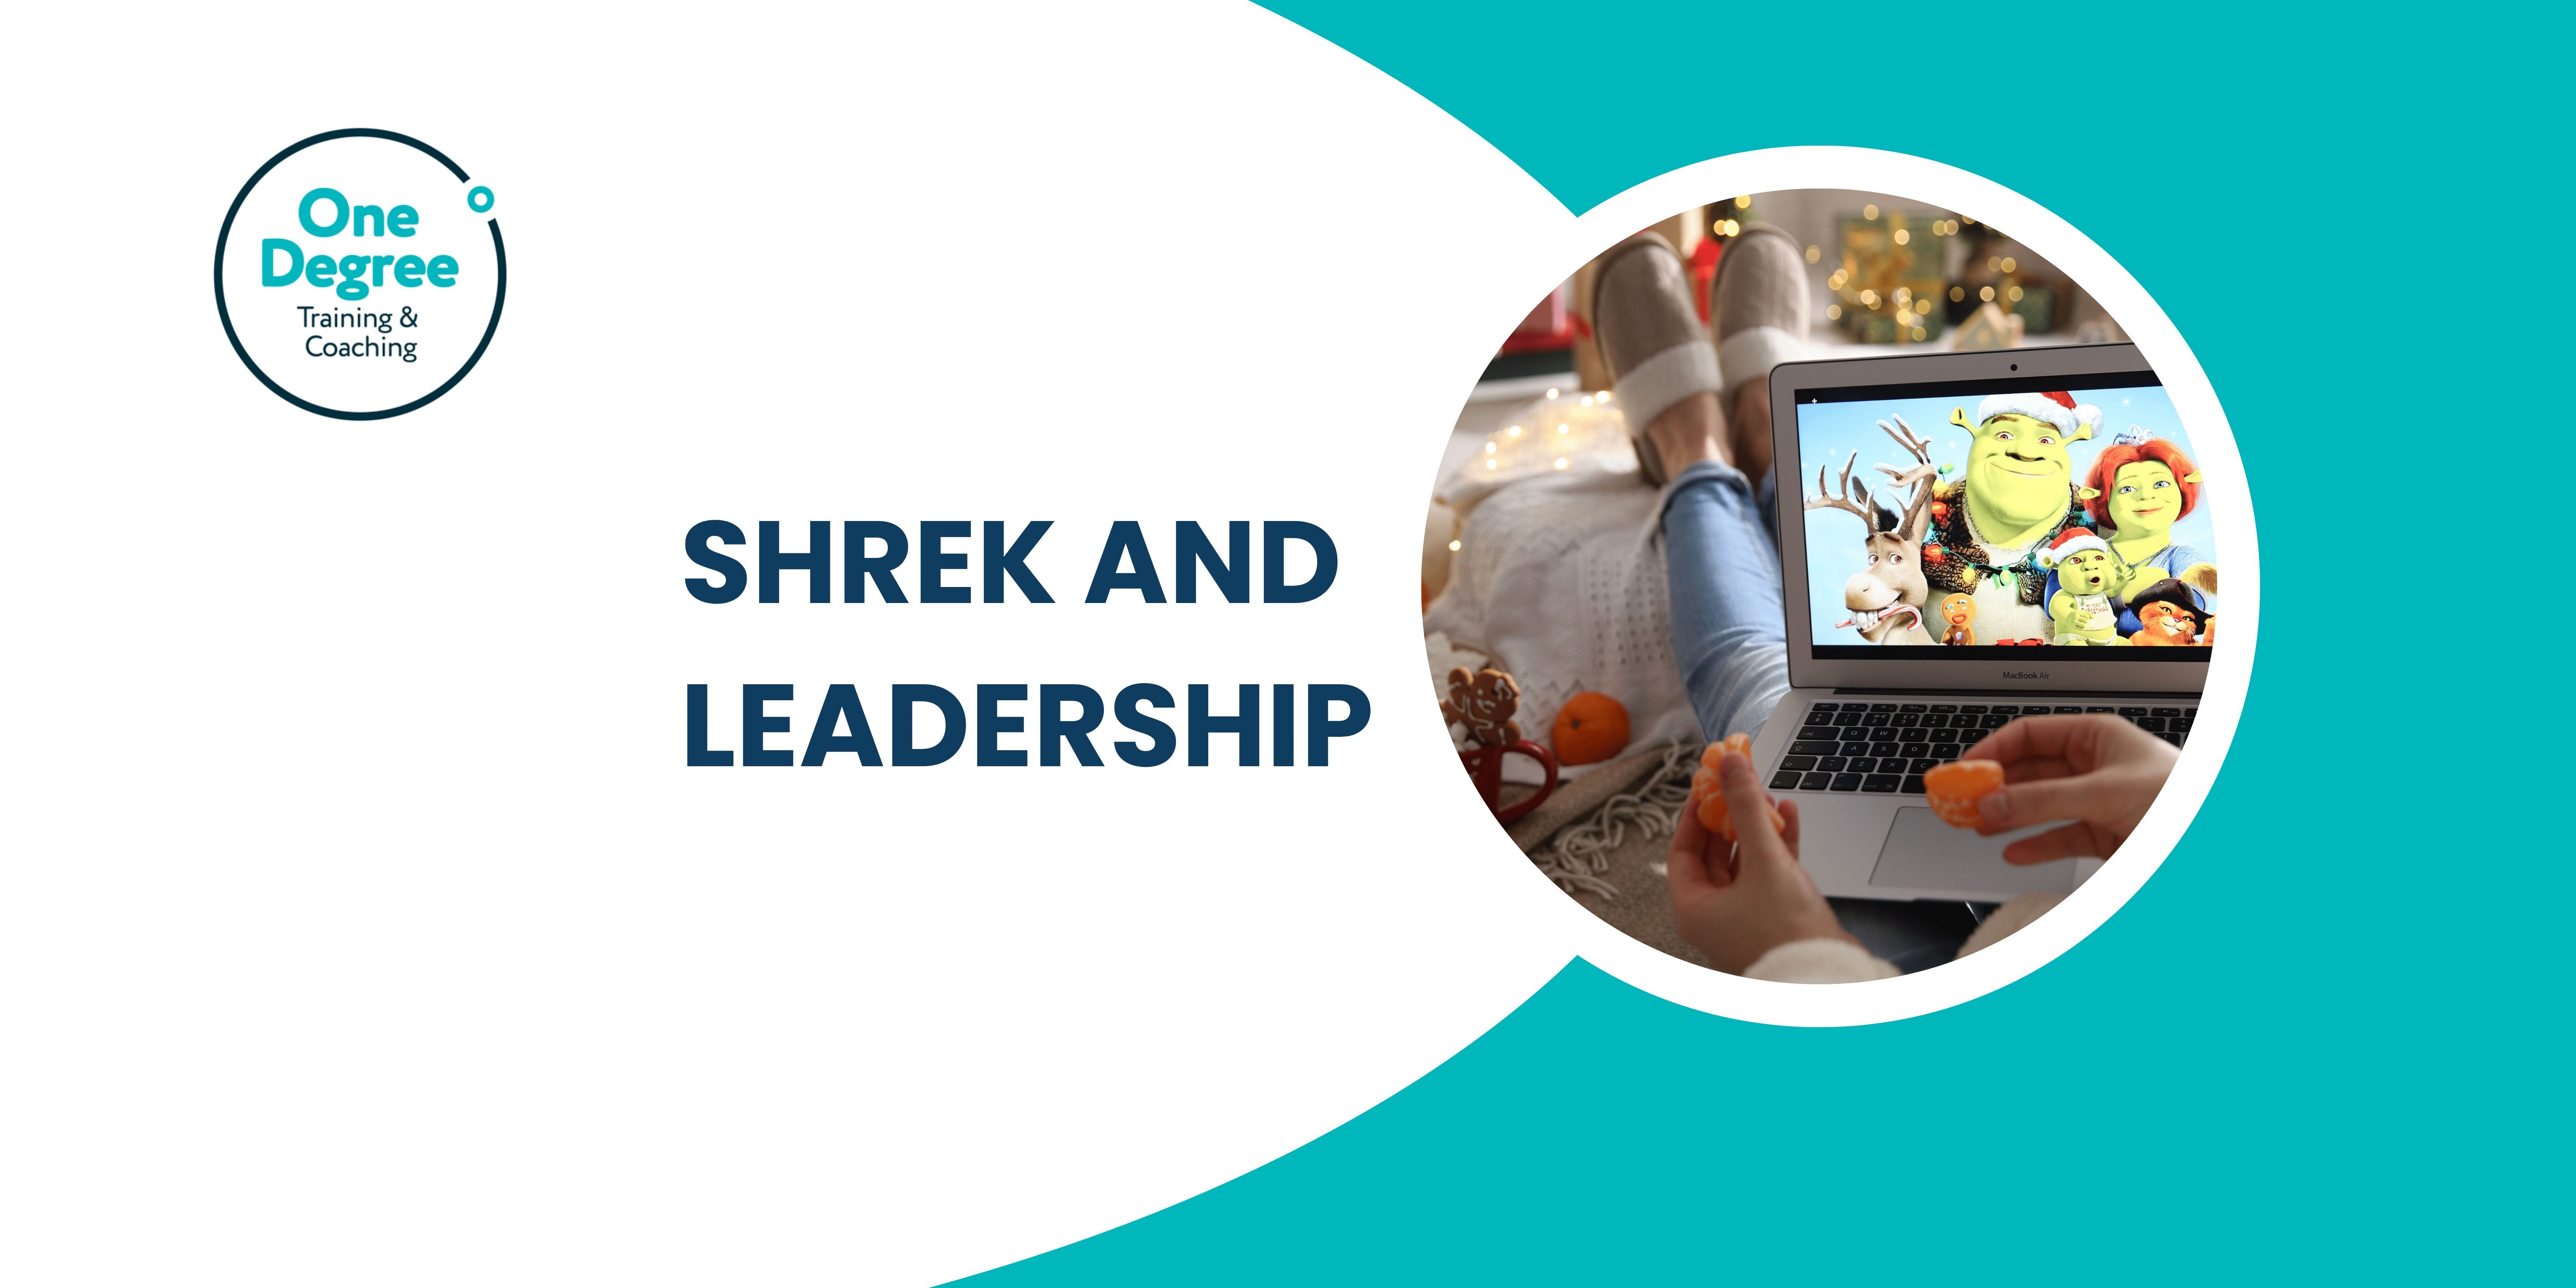 What can Donkey from Shrek Teach us about Leadership?